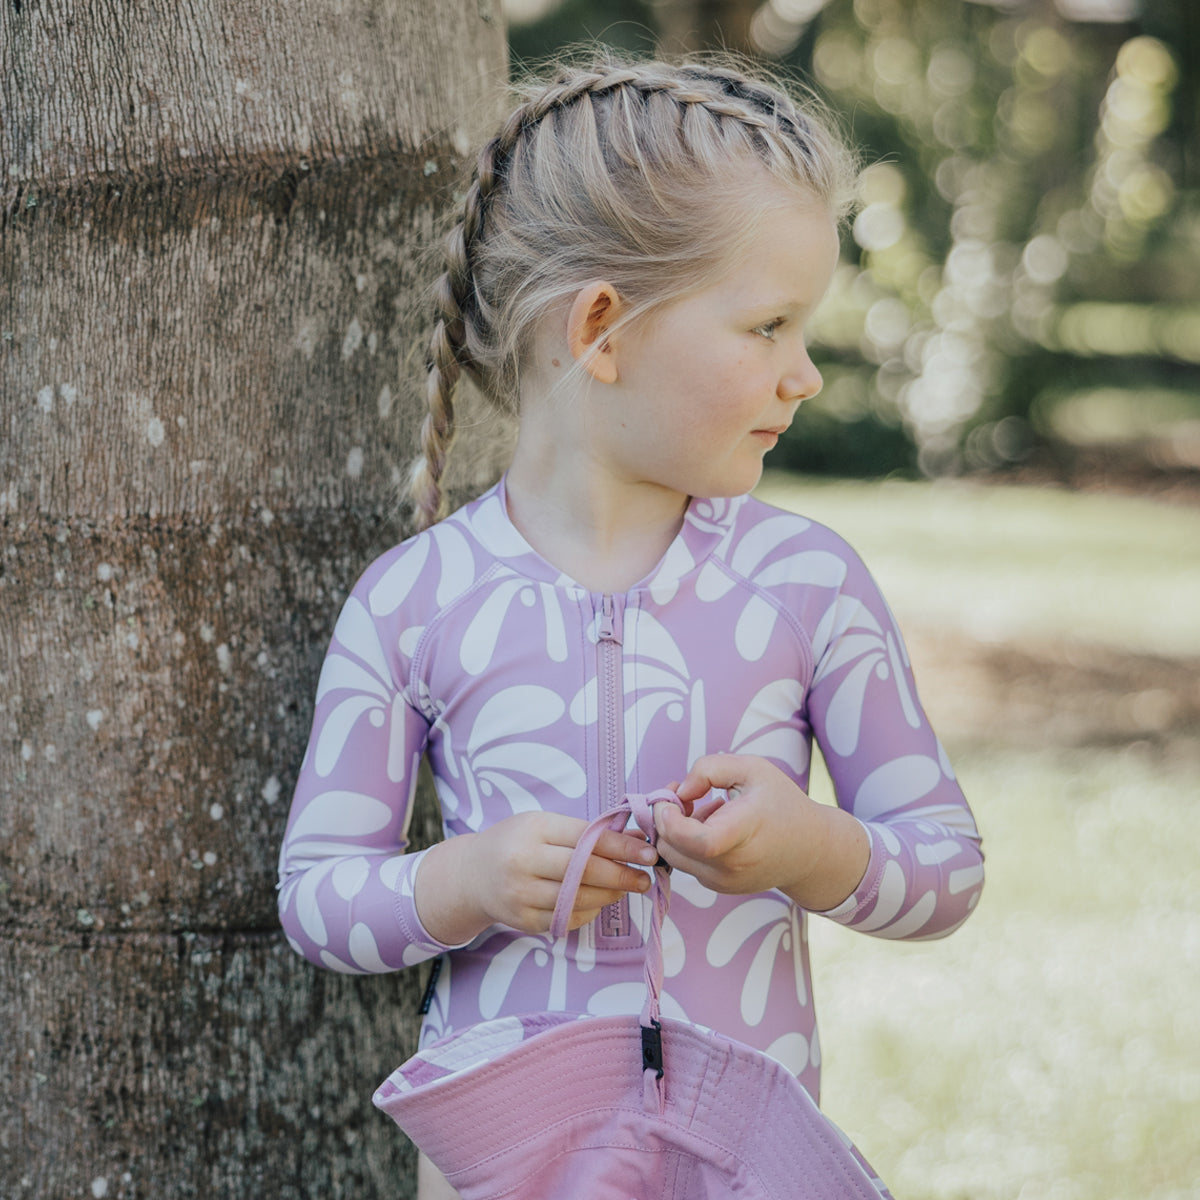 Long Sleeve Swimsuit / Lilac Palms